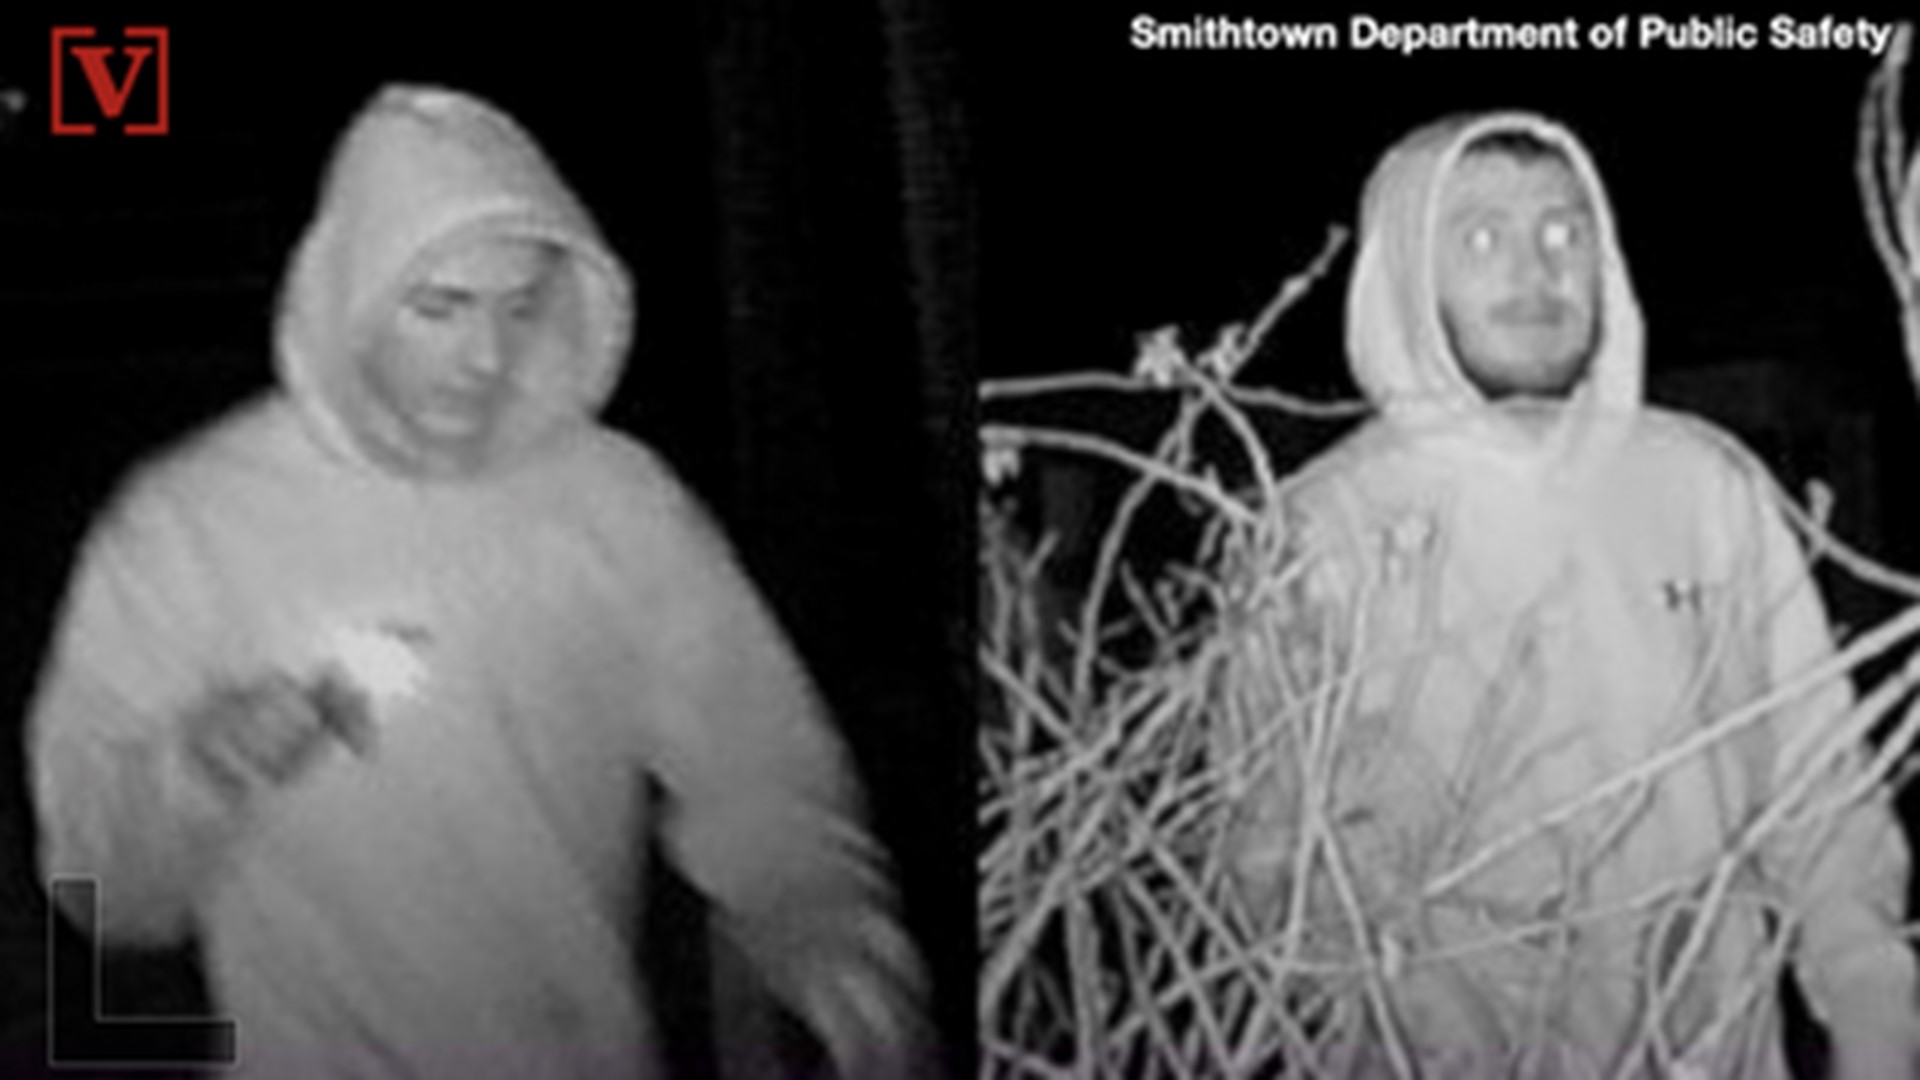 Police On The Hunt For Two Men Broke Into Nature Center; Force Fed Goat Beer & Harassed Other Animals | 12newsnow.com